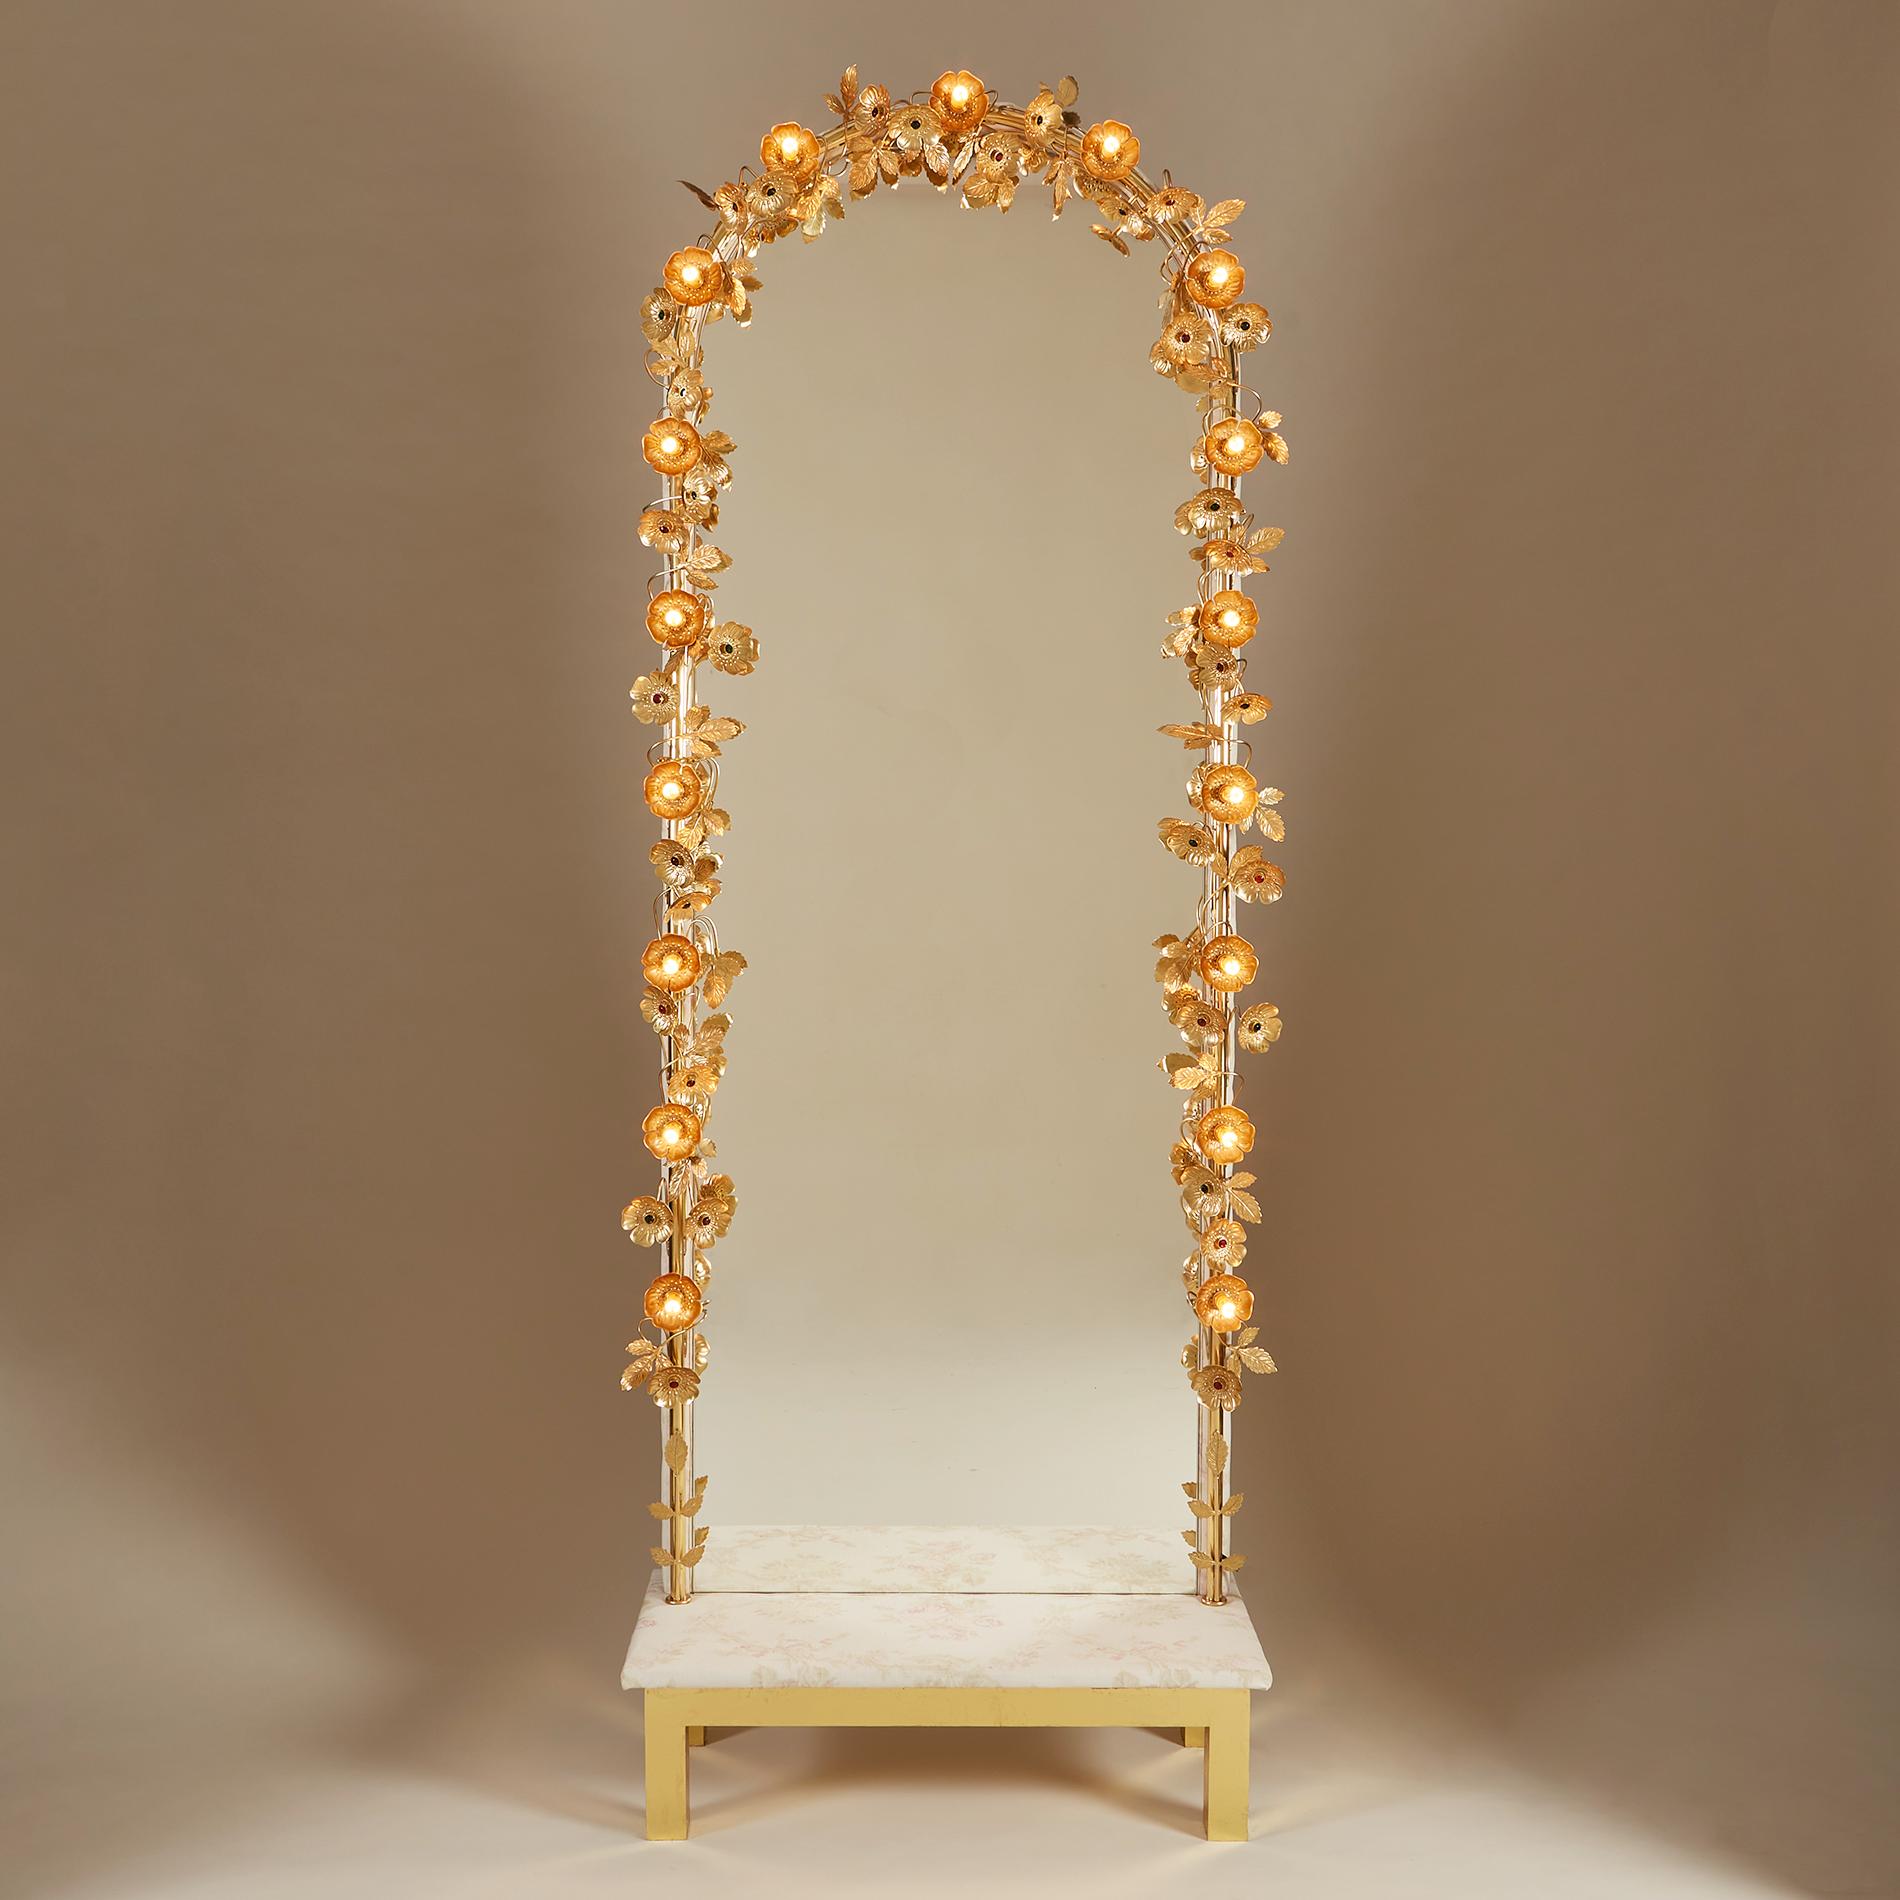 Freestanding mirror with flower lights. Delicate gold brass flowers and leaves encircle our dramatic freestanding light mirror. Each flower is finished with a ruby or emerald centre unless it holds one of seventeen subtle light-up flowers. This